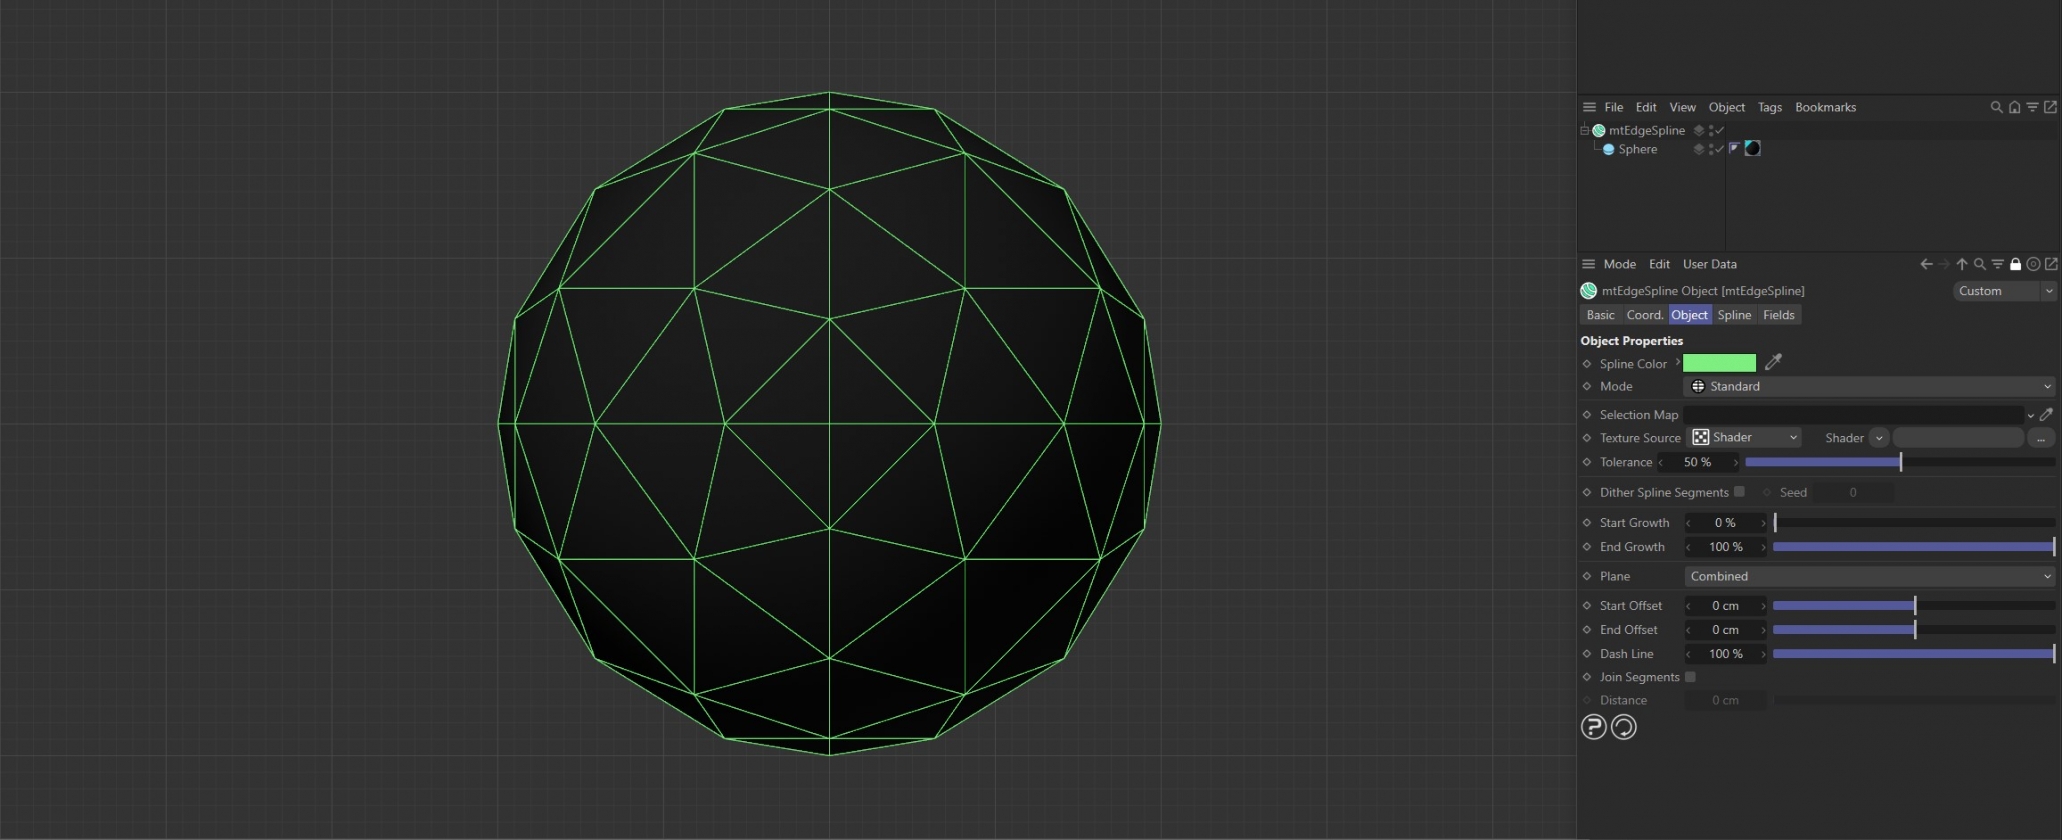 The mtEdgeSpline Mode is set to Standard for this Sphere. All of the original base mesh edges are being used to generate the spline.